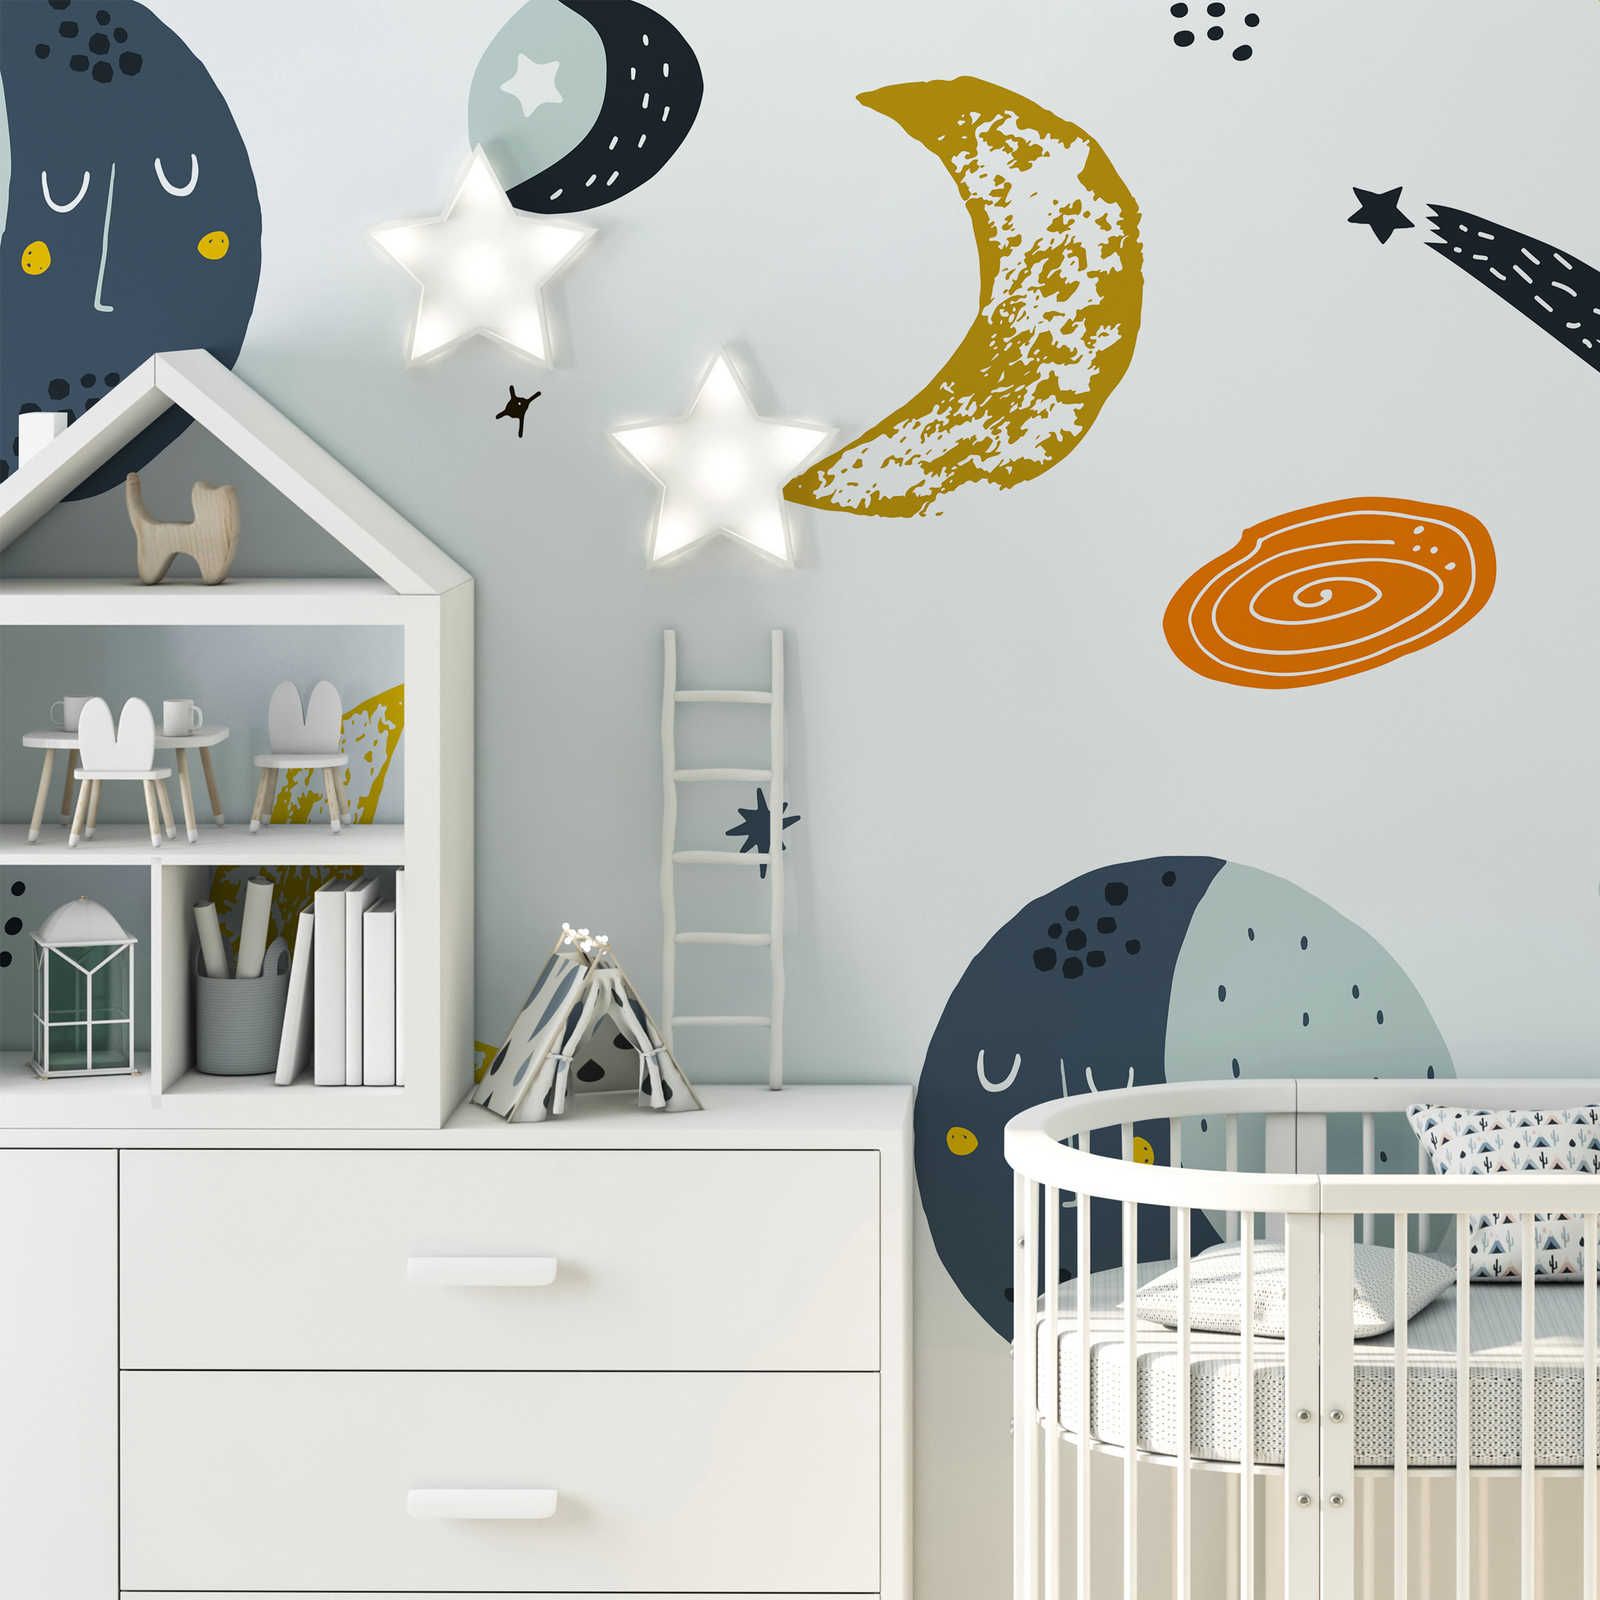 Photo wallpaper with moons and shooting stars - Smooth & matt non-woven
